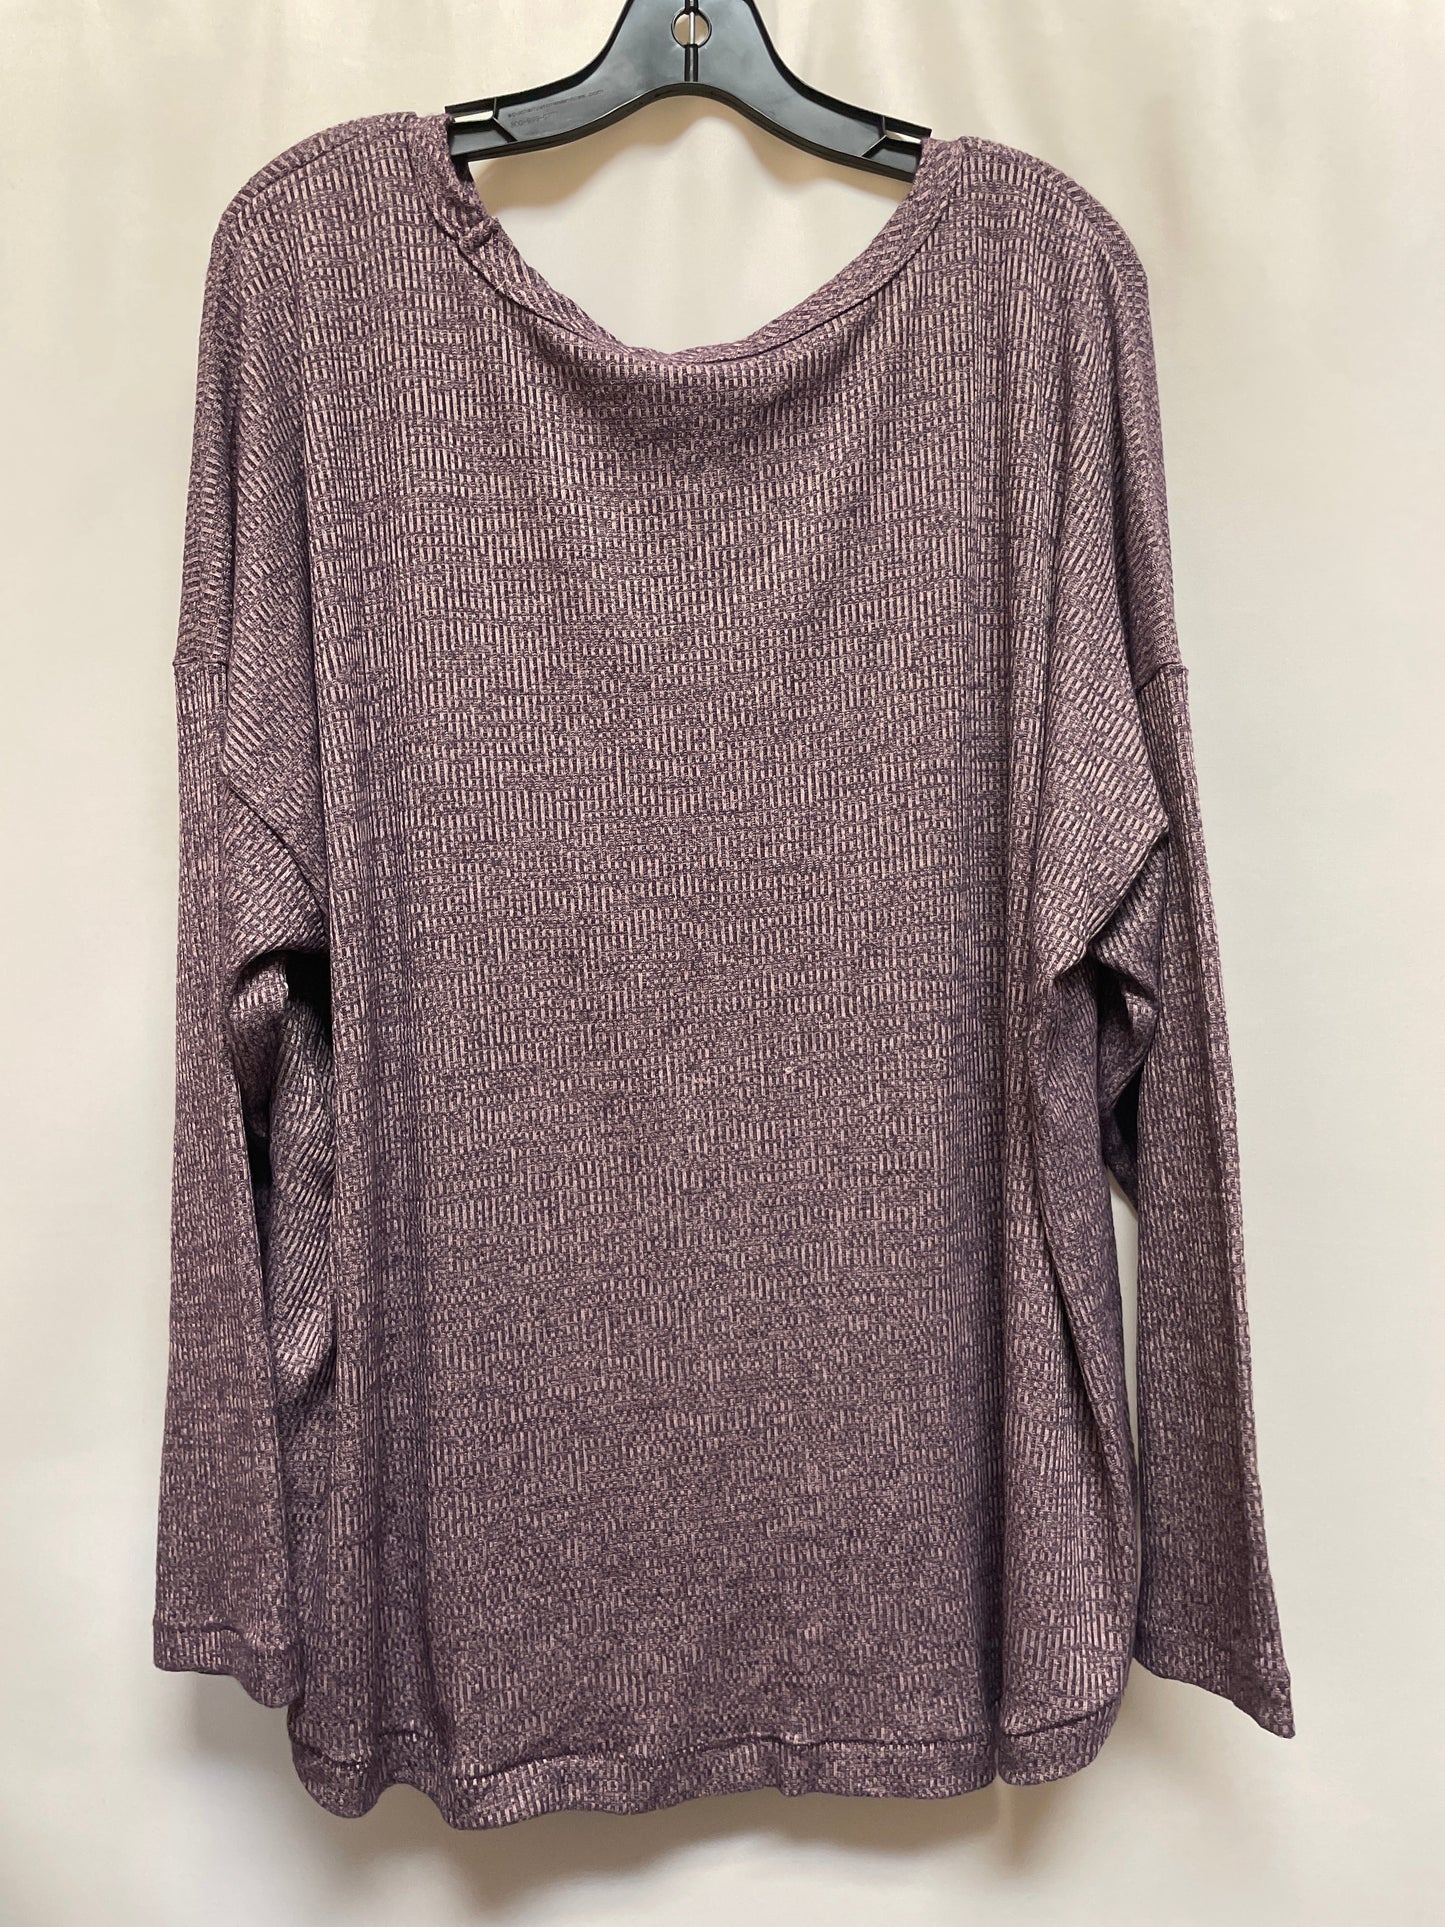 Top Long Sleeve By Philosophy  Size: 3x